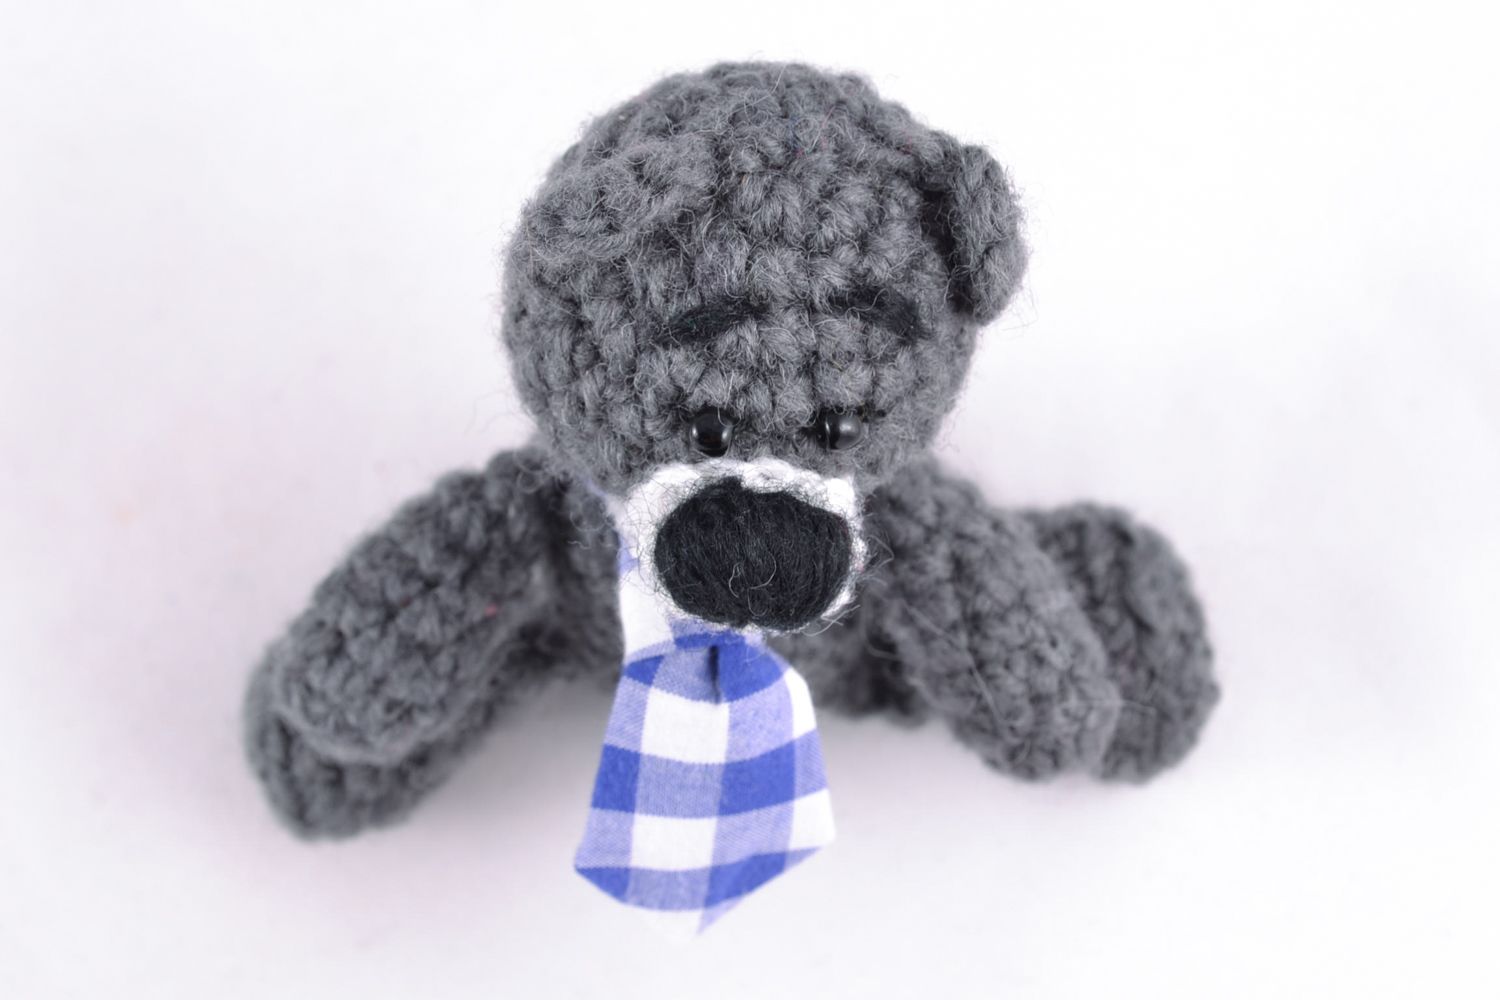 Handmade toy crocheted in the shape of bear photo 5